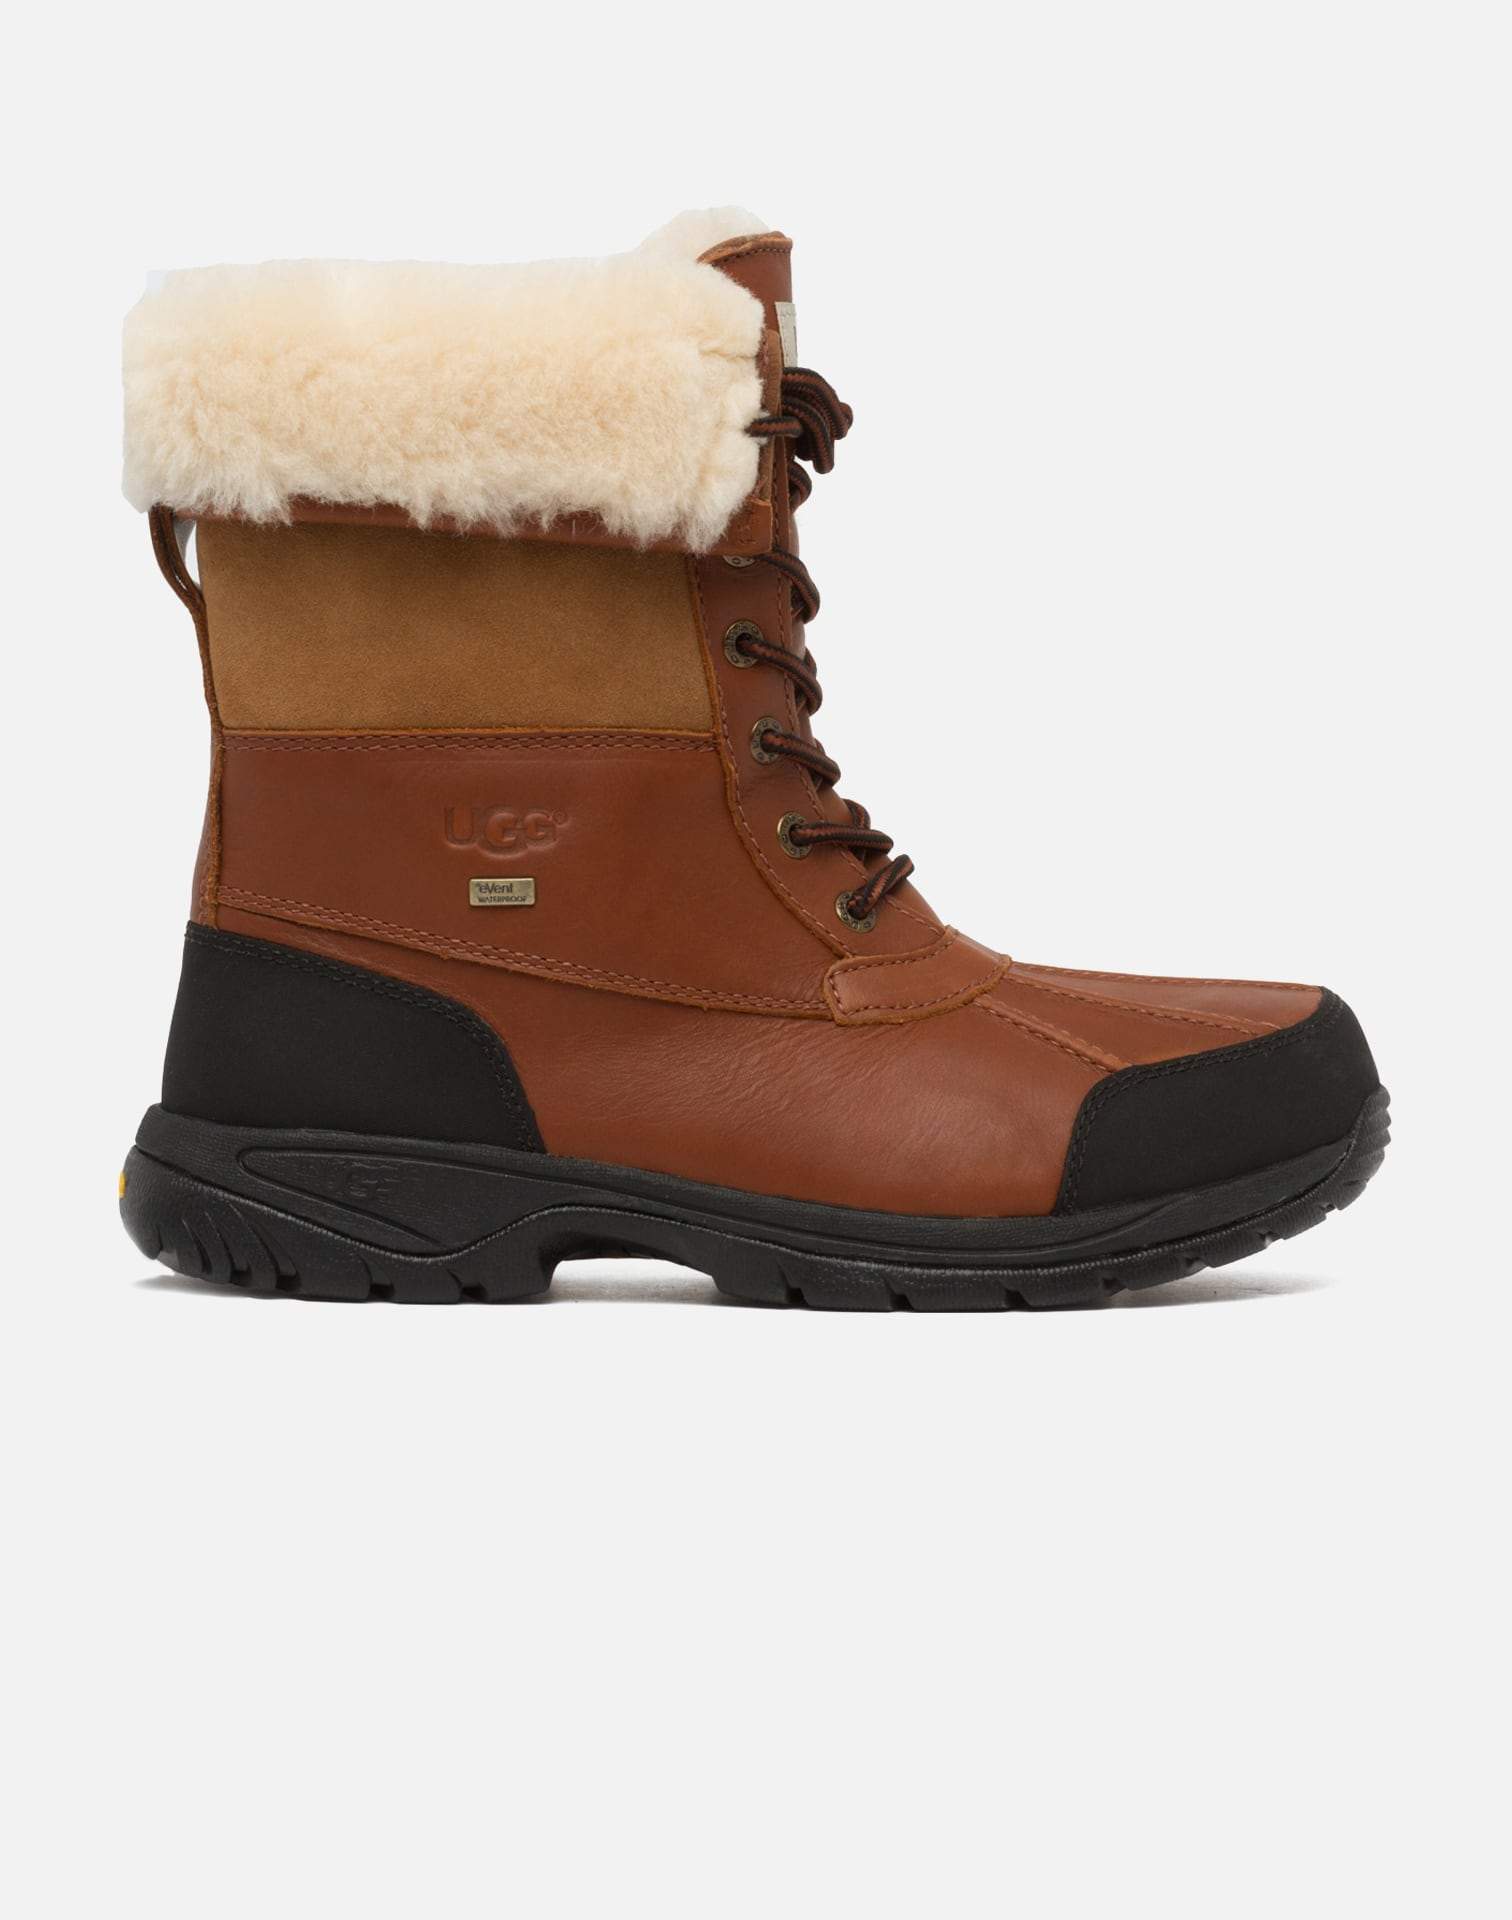 UGG BUTTE BOOTS